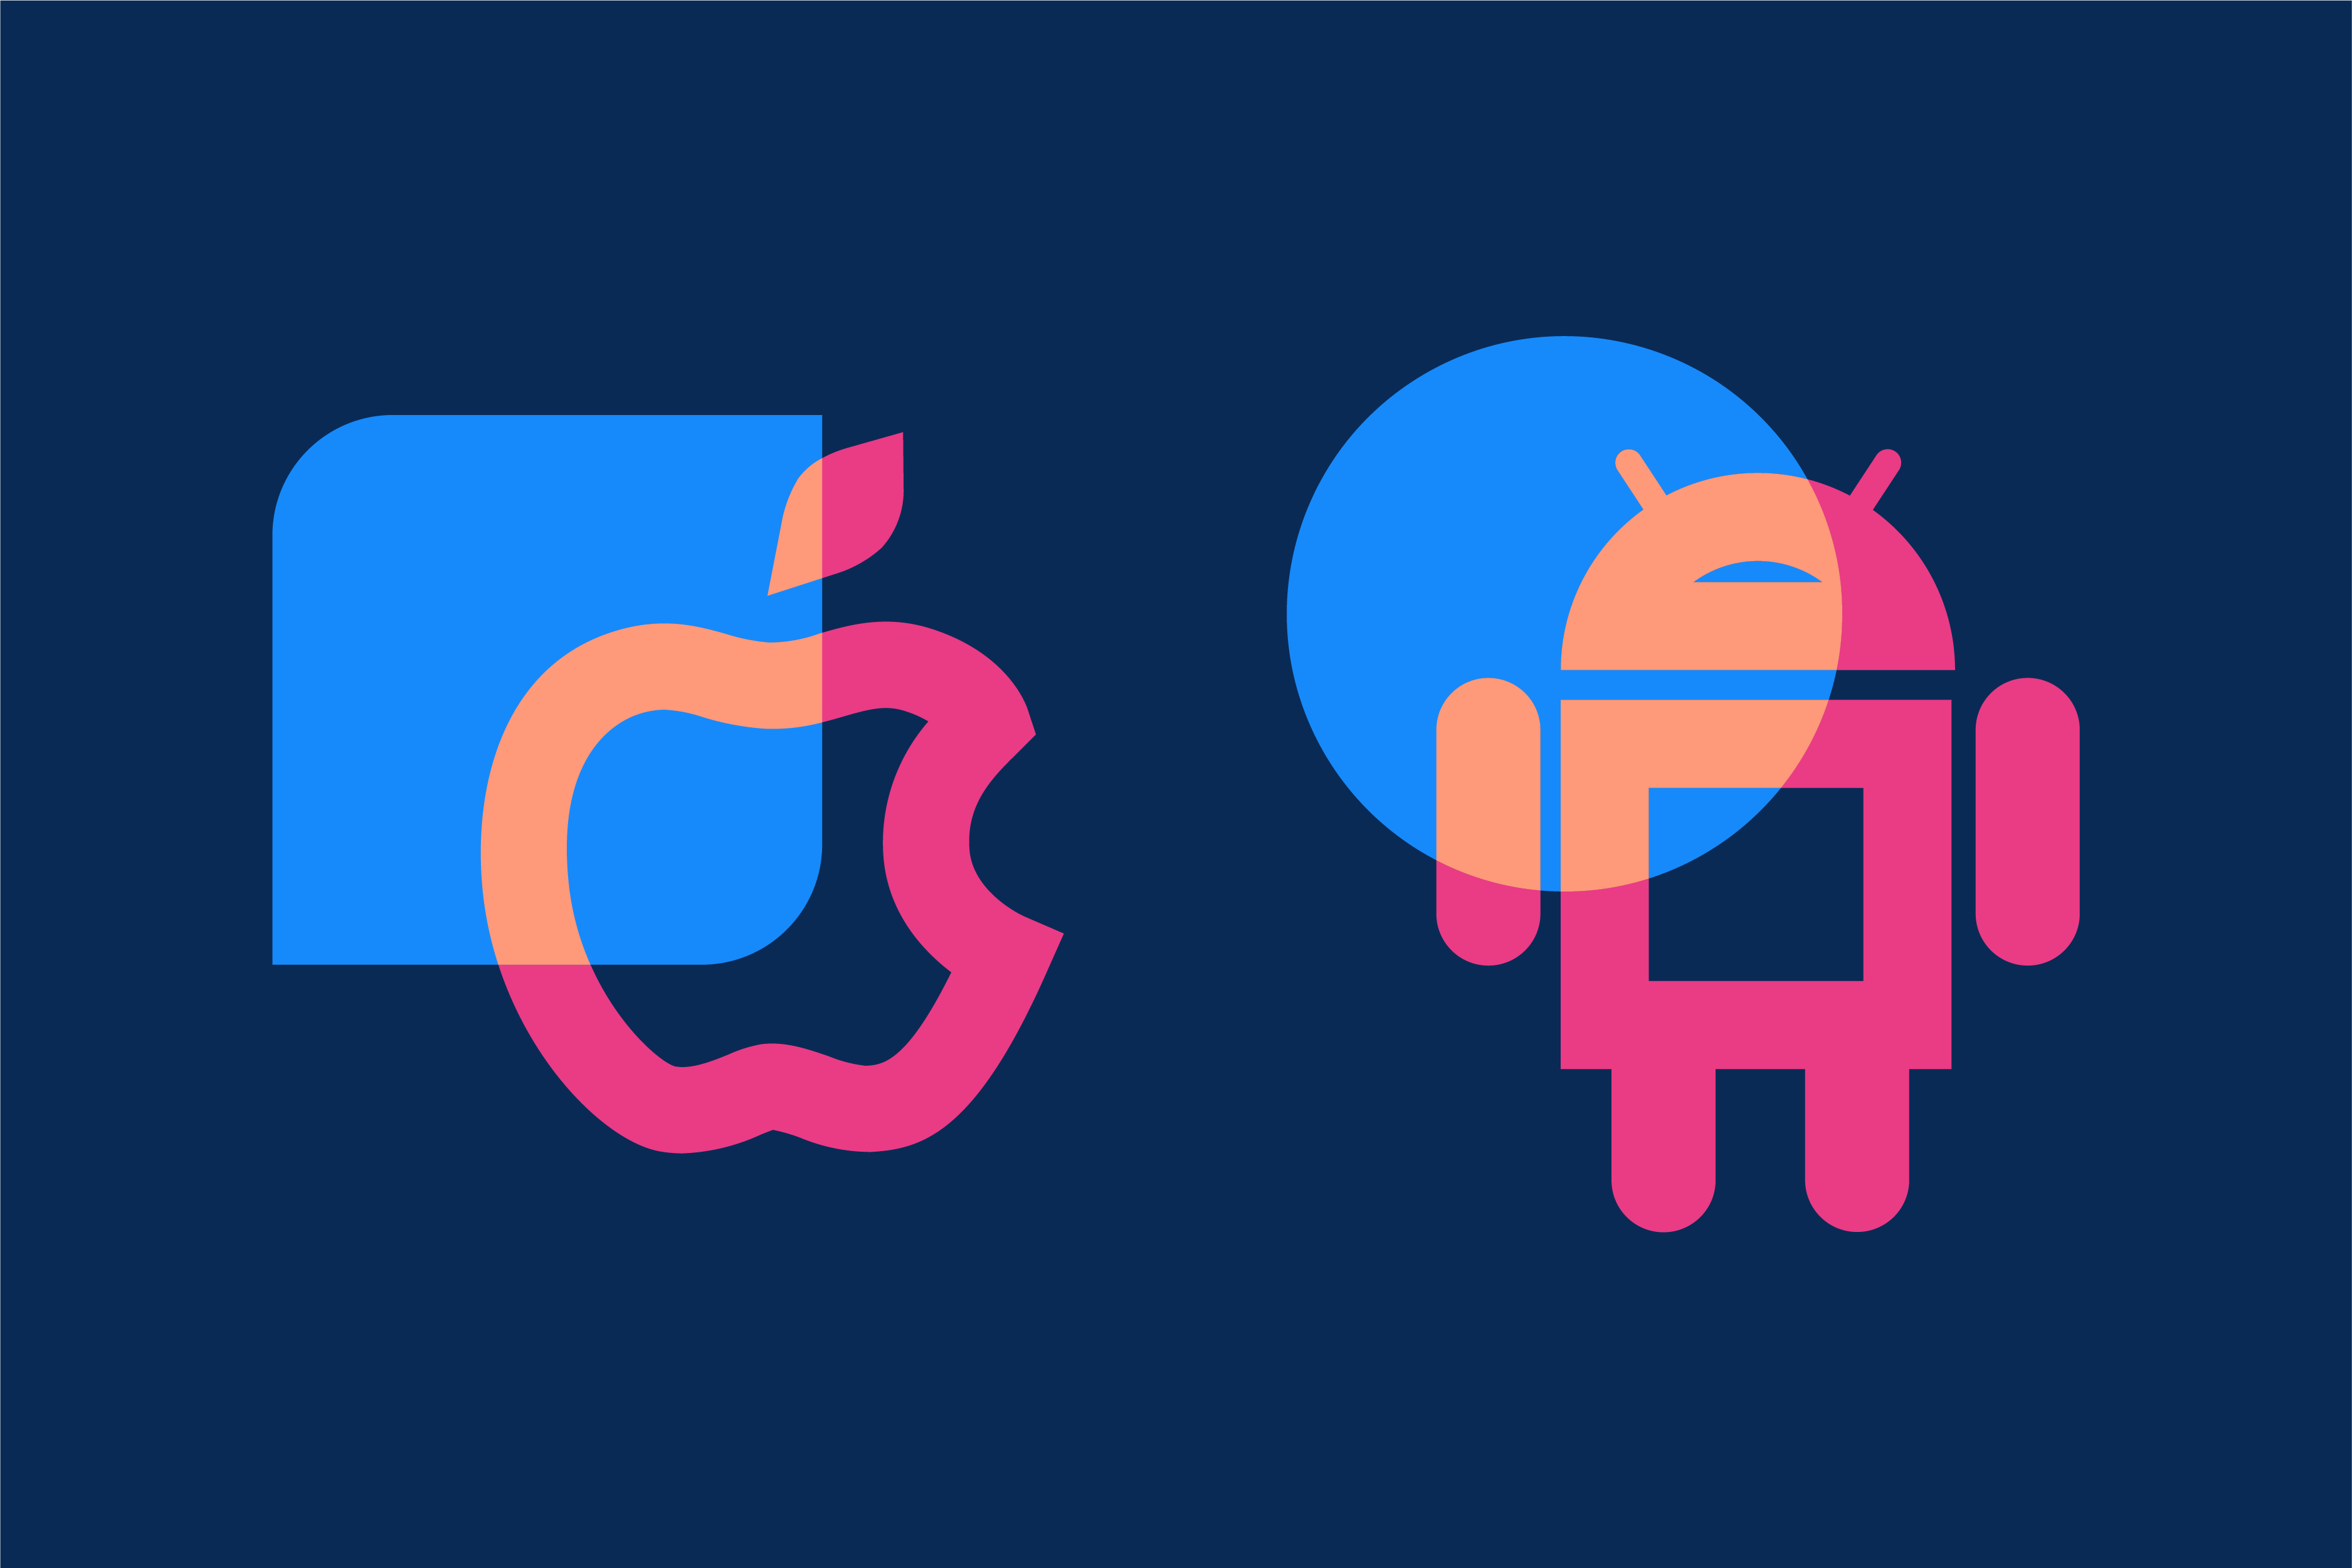 iOS or Android: Which platform first?